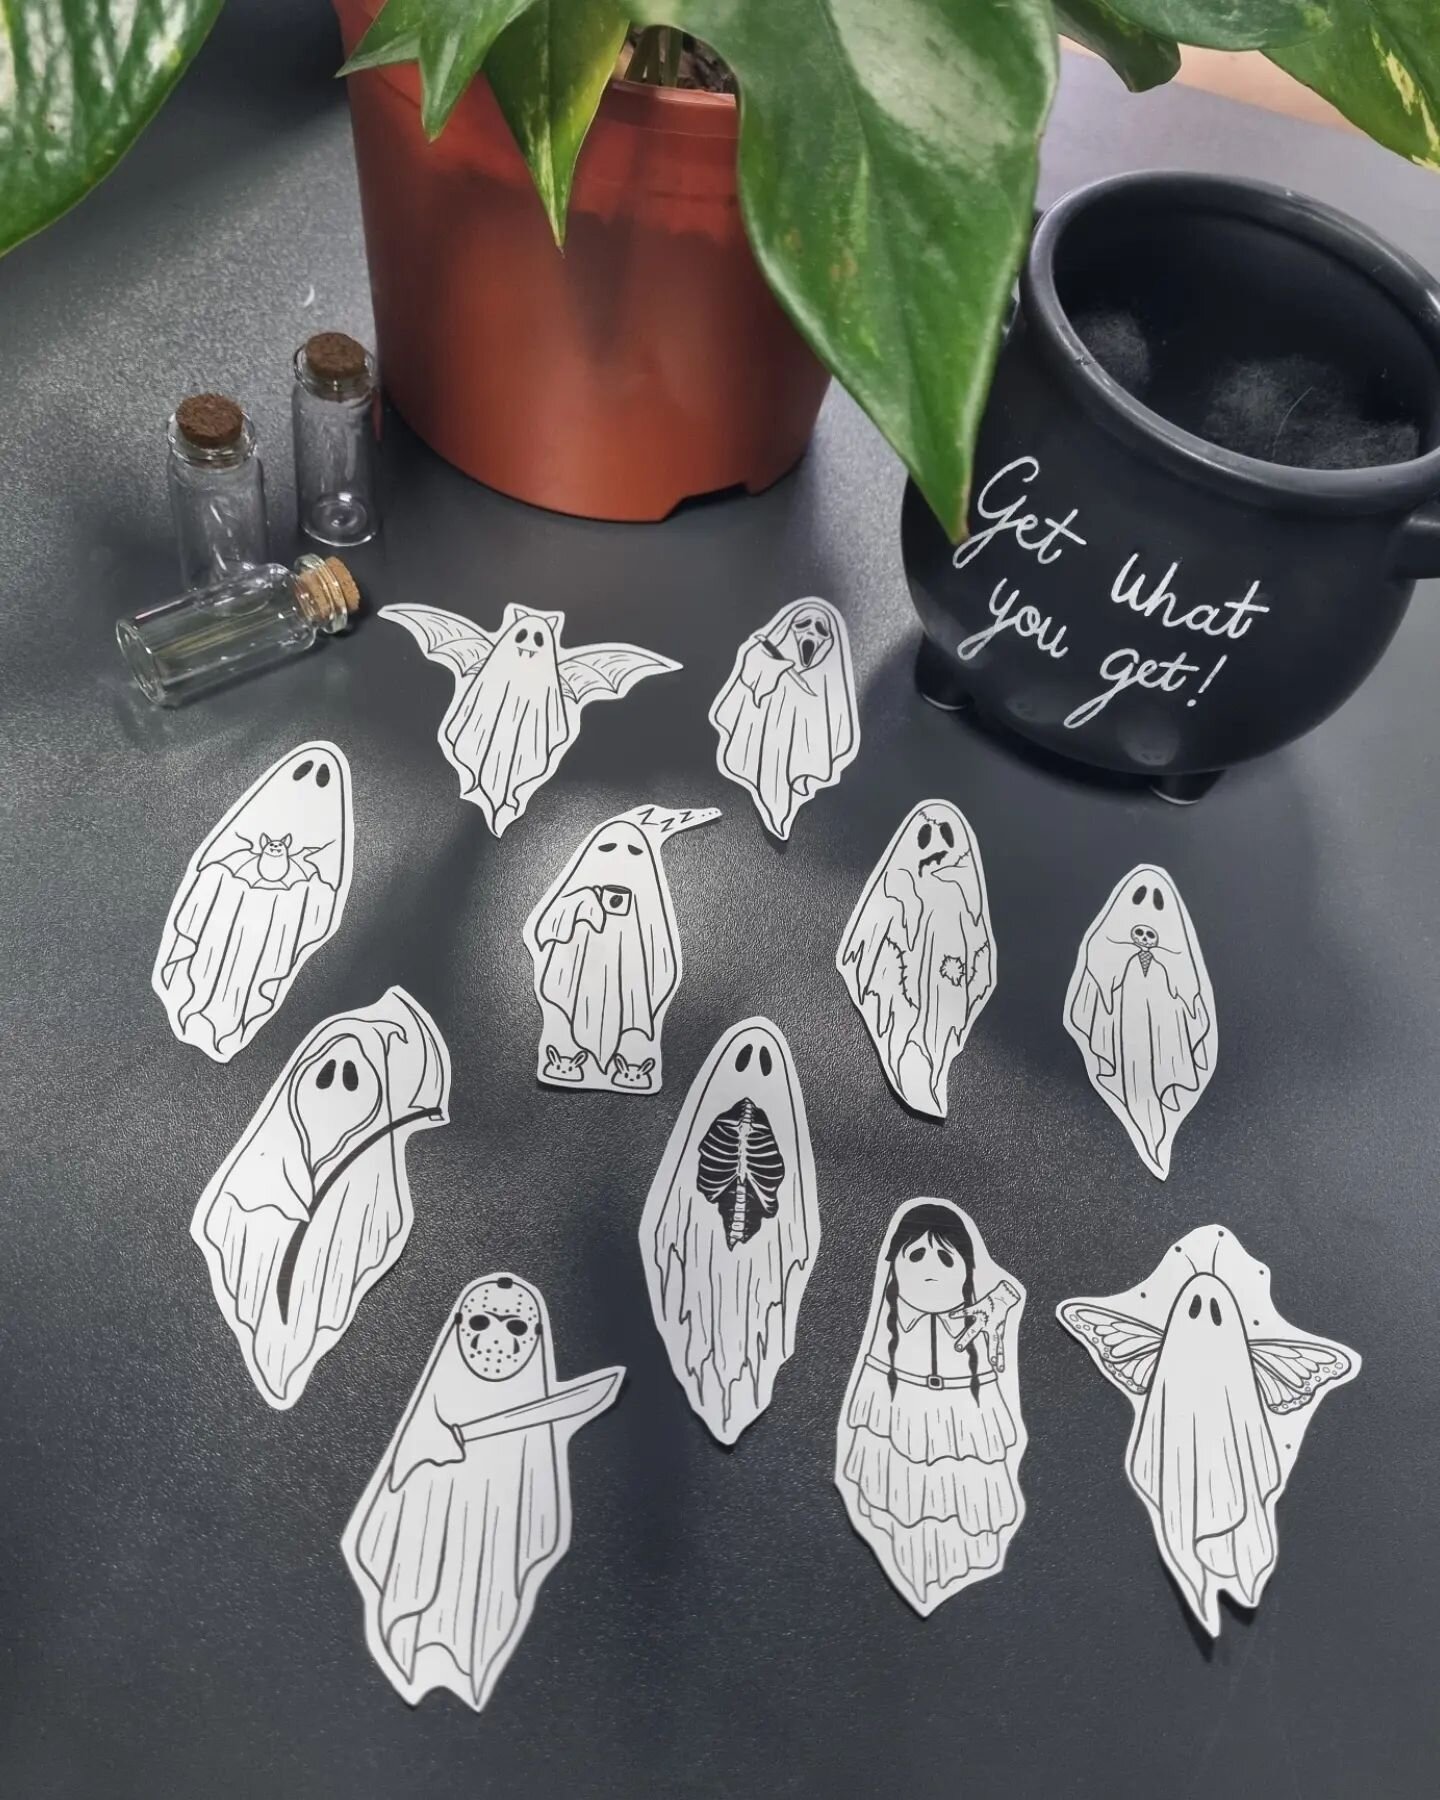 Incase you missed my recent story- I'm now doing a GWYG (aka get what you get) - ghost edition! 👻 

Prices range from &pound;60-&pound;80 depending on if you choose colour or b&amp;g! 

Message me to book 🖤

#tattoo #tattoodesigns #tattooflash #fla